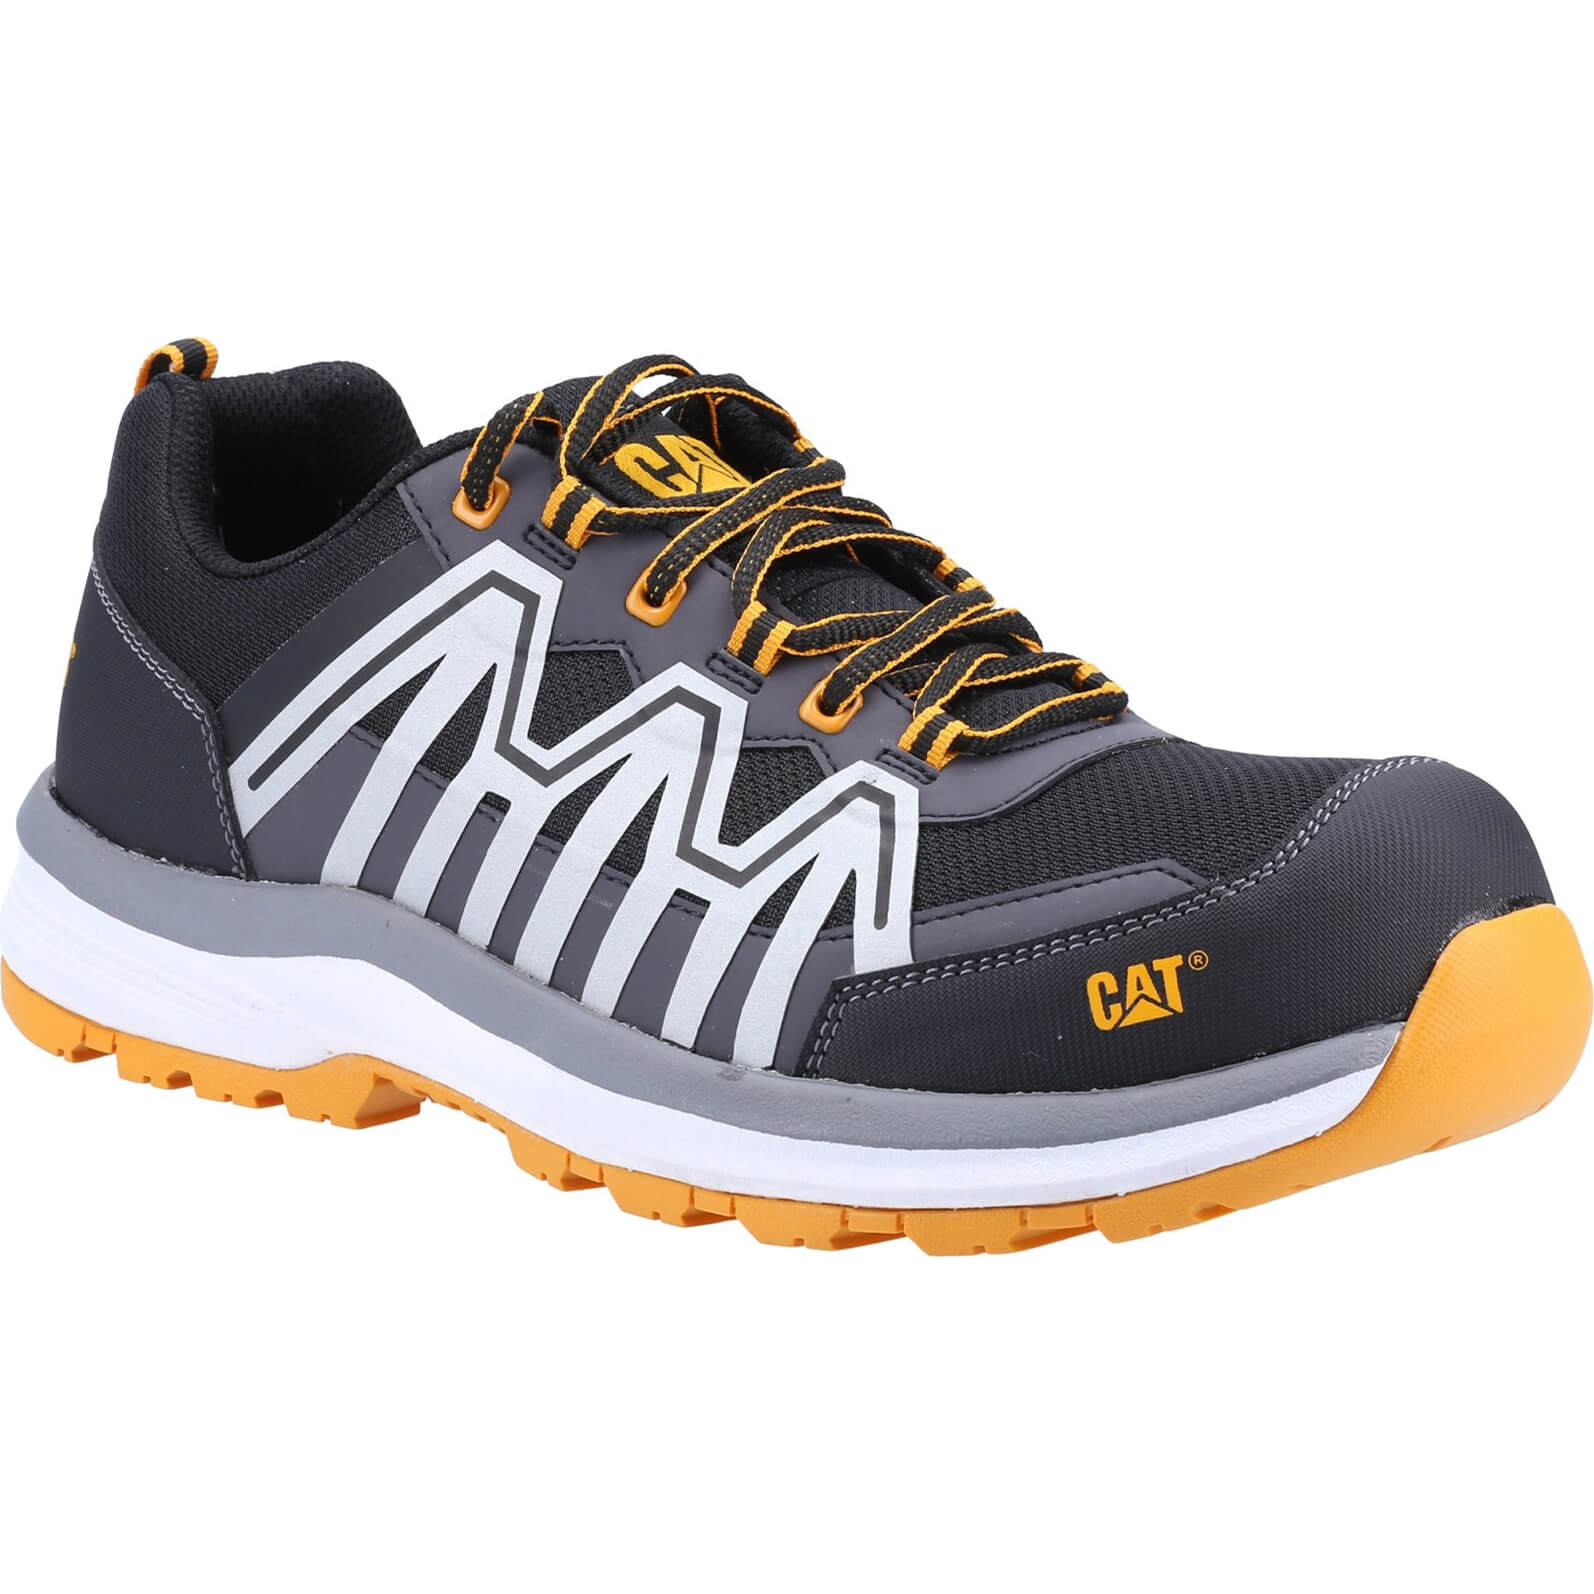 Image of Caterpillar Mens Charge S3 Safety Trainer Orange Size 13